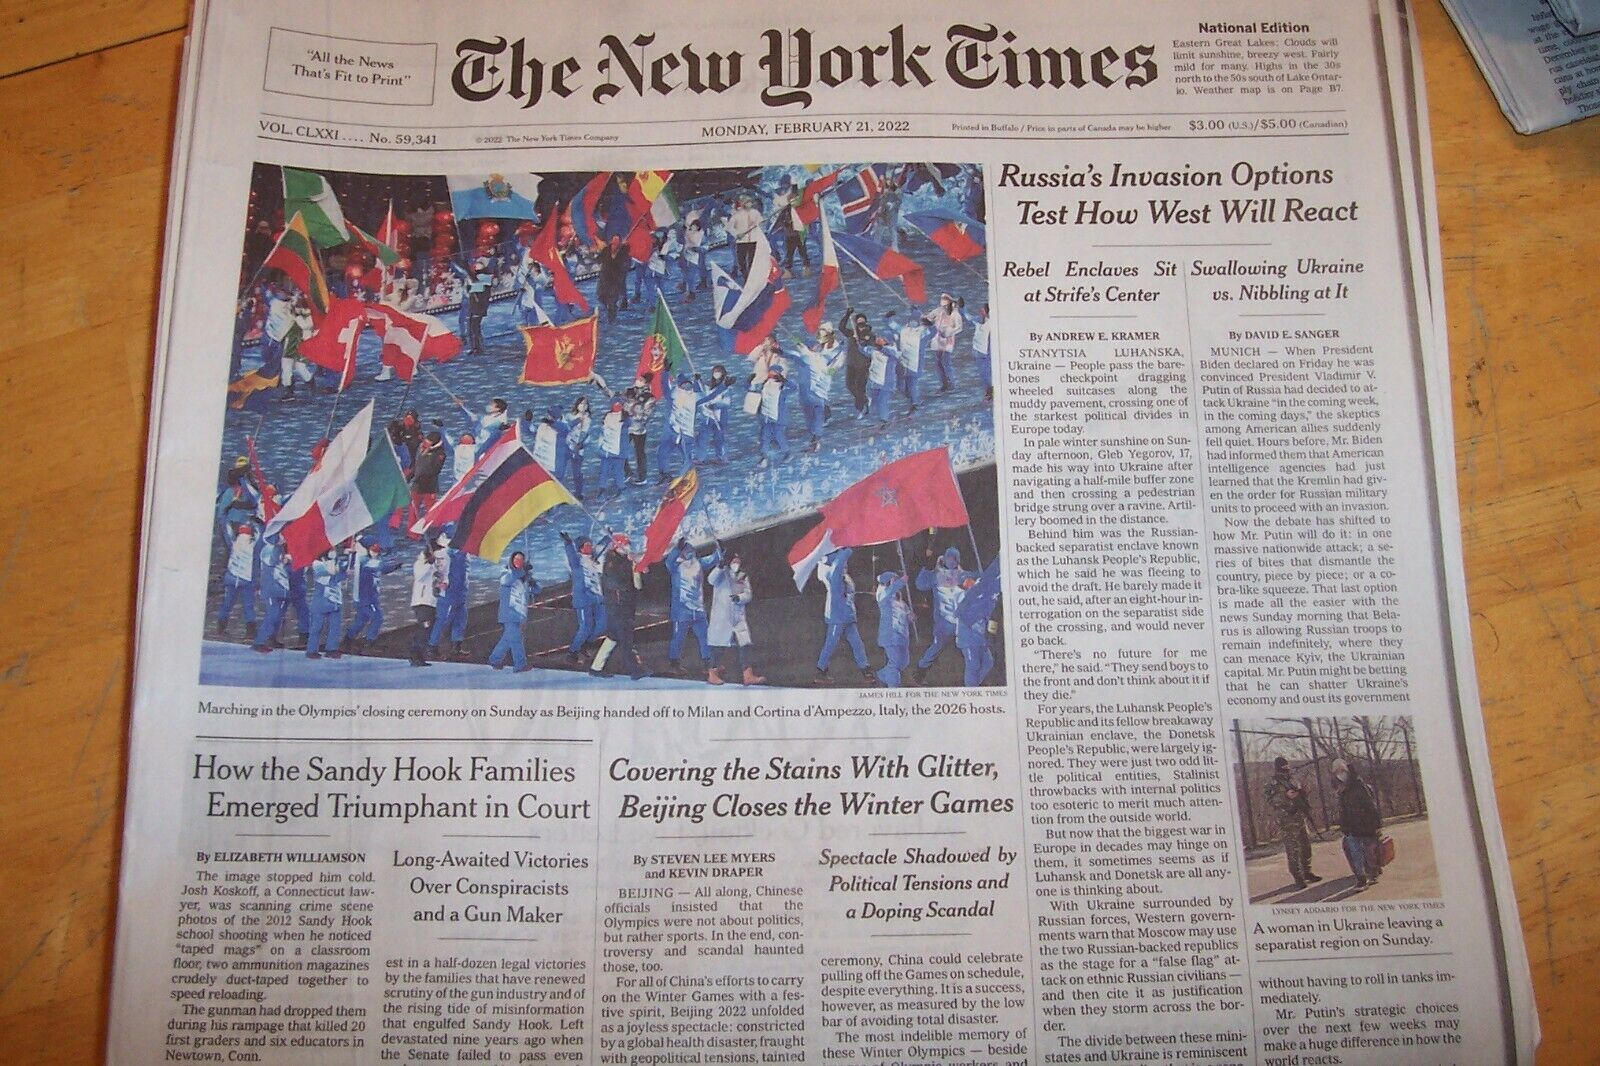 THE NEW YORK TIMES MONDAY FEBRUARY 21, 2022